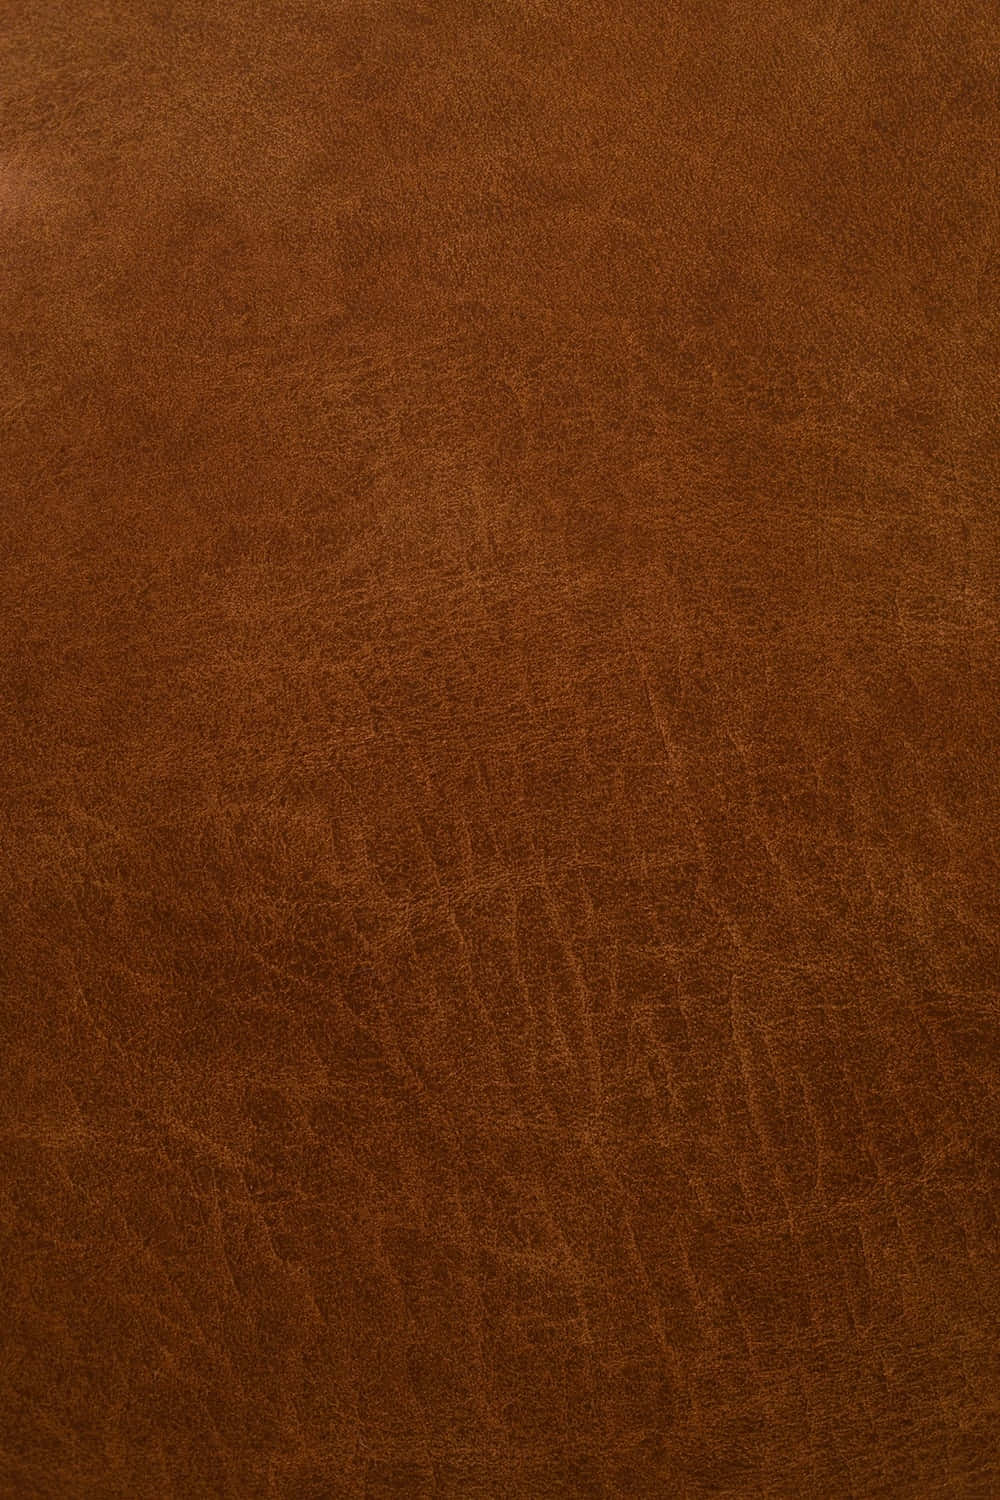 A Close-up Of A Rich Brown Leather Texture Wallpaper